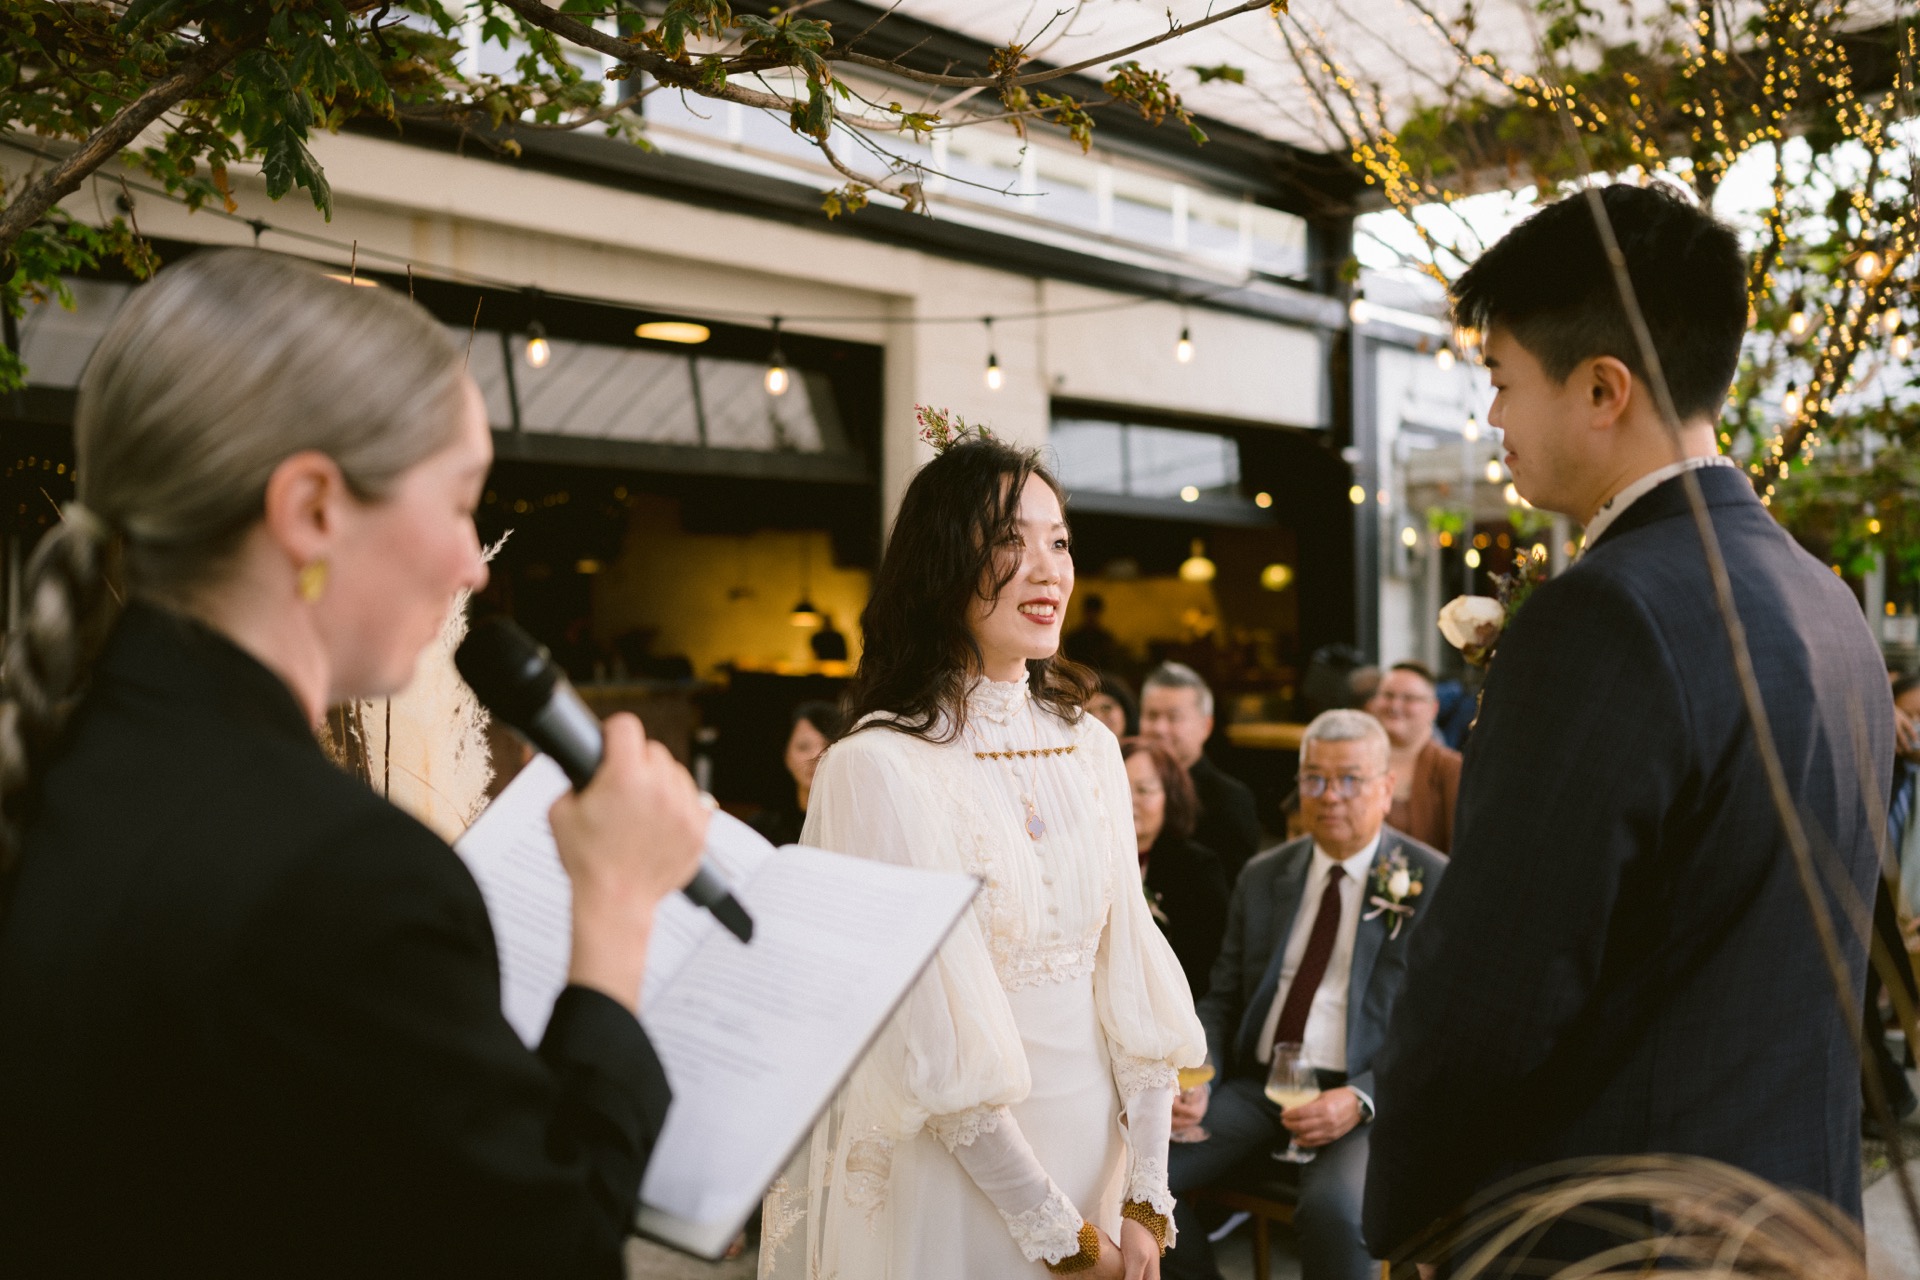 A bride and groom exchange vows outdoors with an officiant leading the ceremony for their micro-wedding.